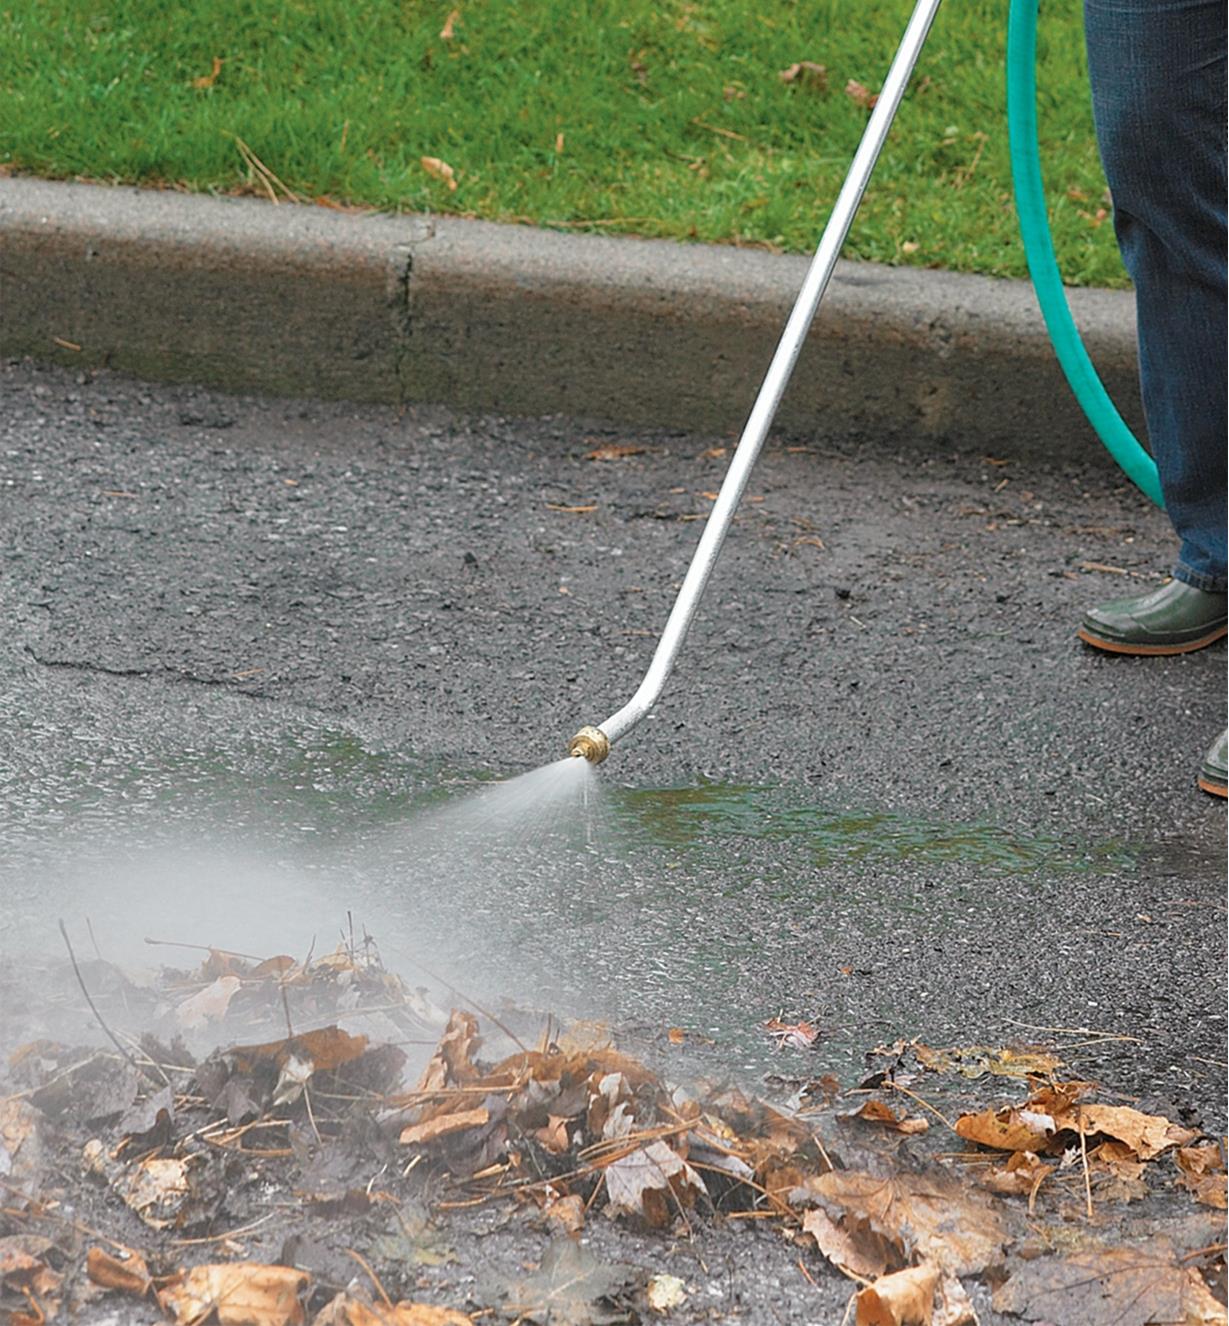 Using the Driveway Washer to clear leaves off pavement